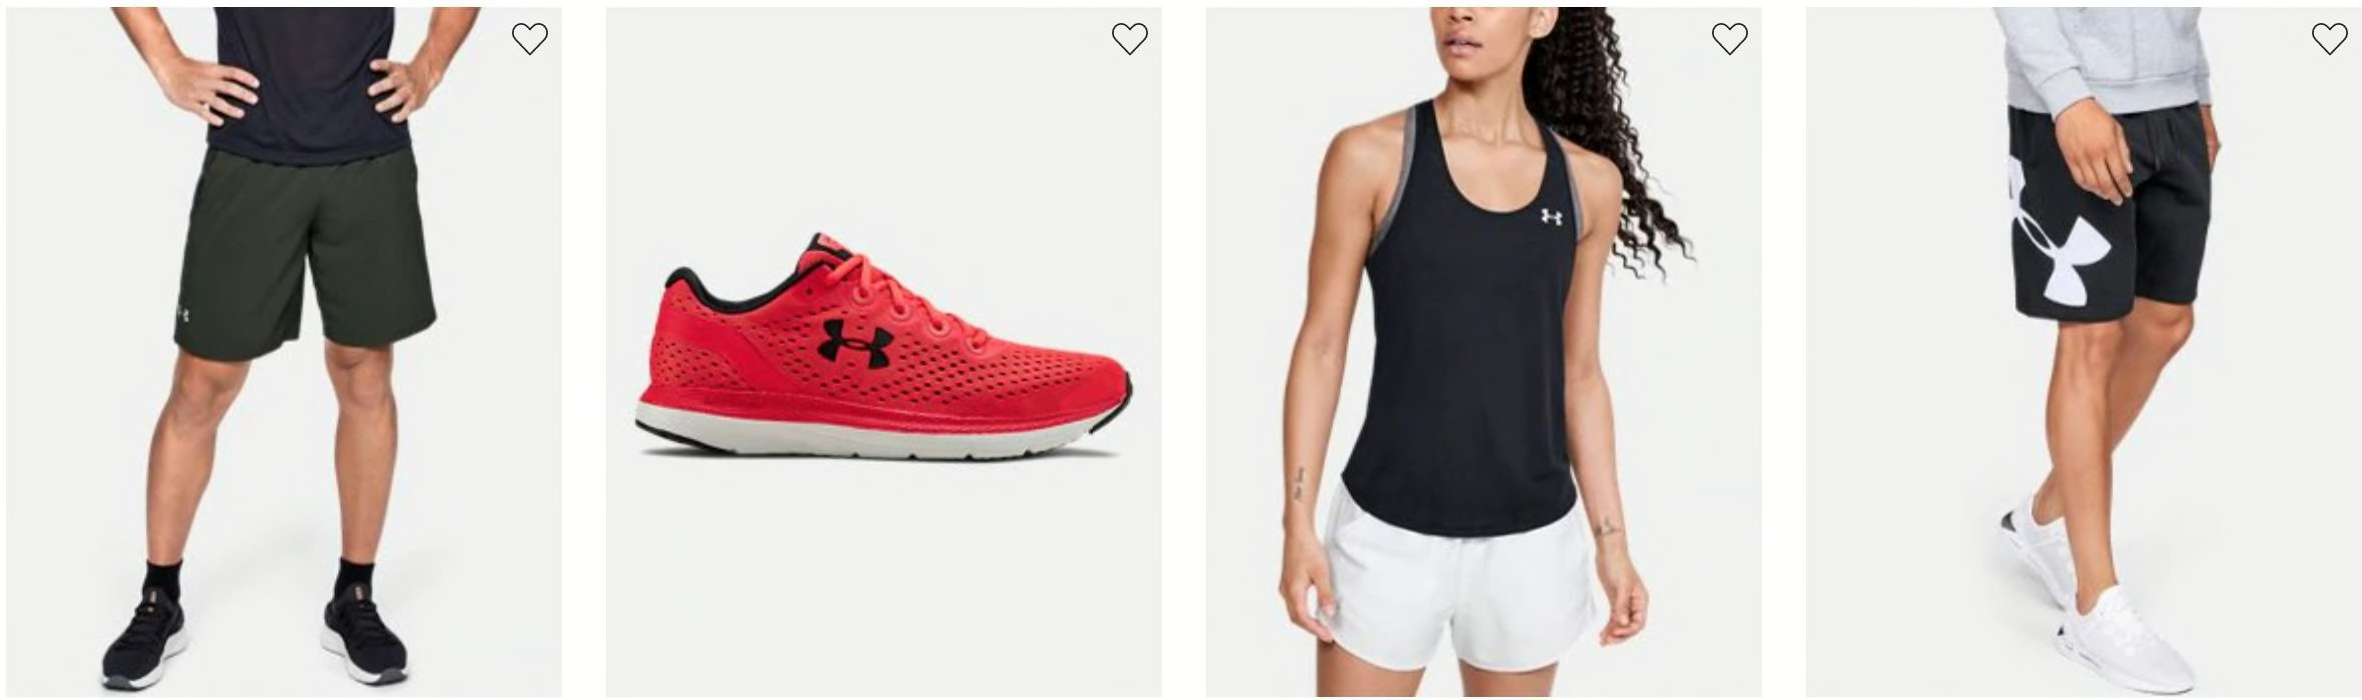 Under Armour Memorial Day Sale: 30% Off Outlet Orders